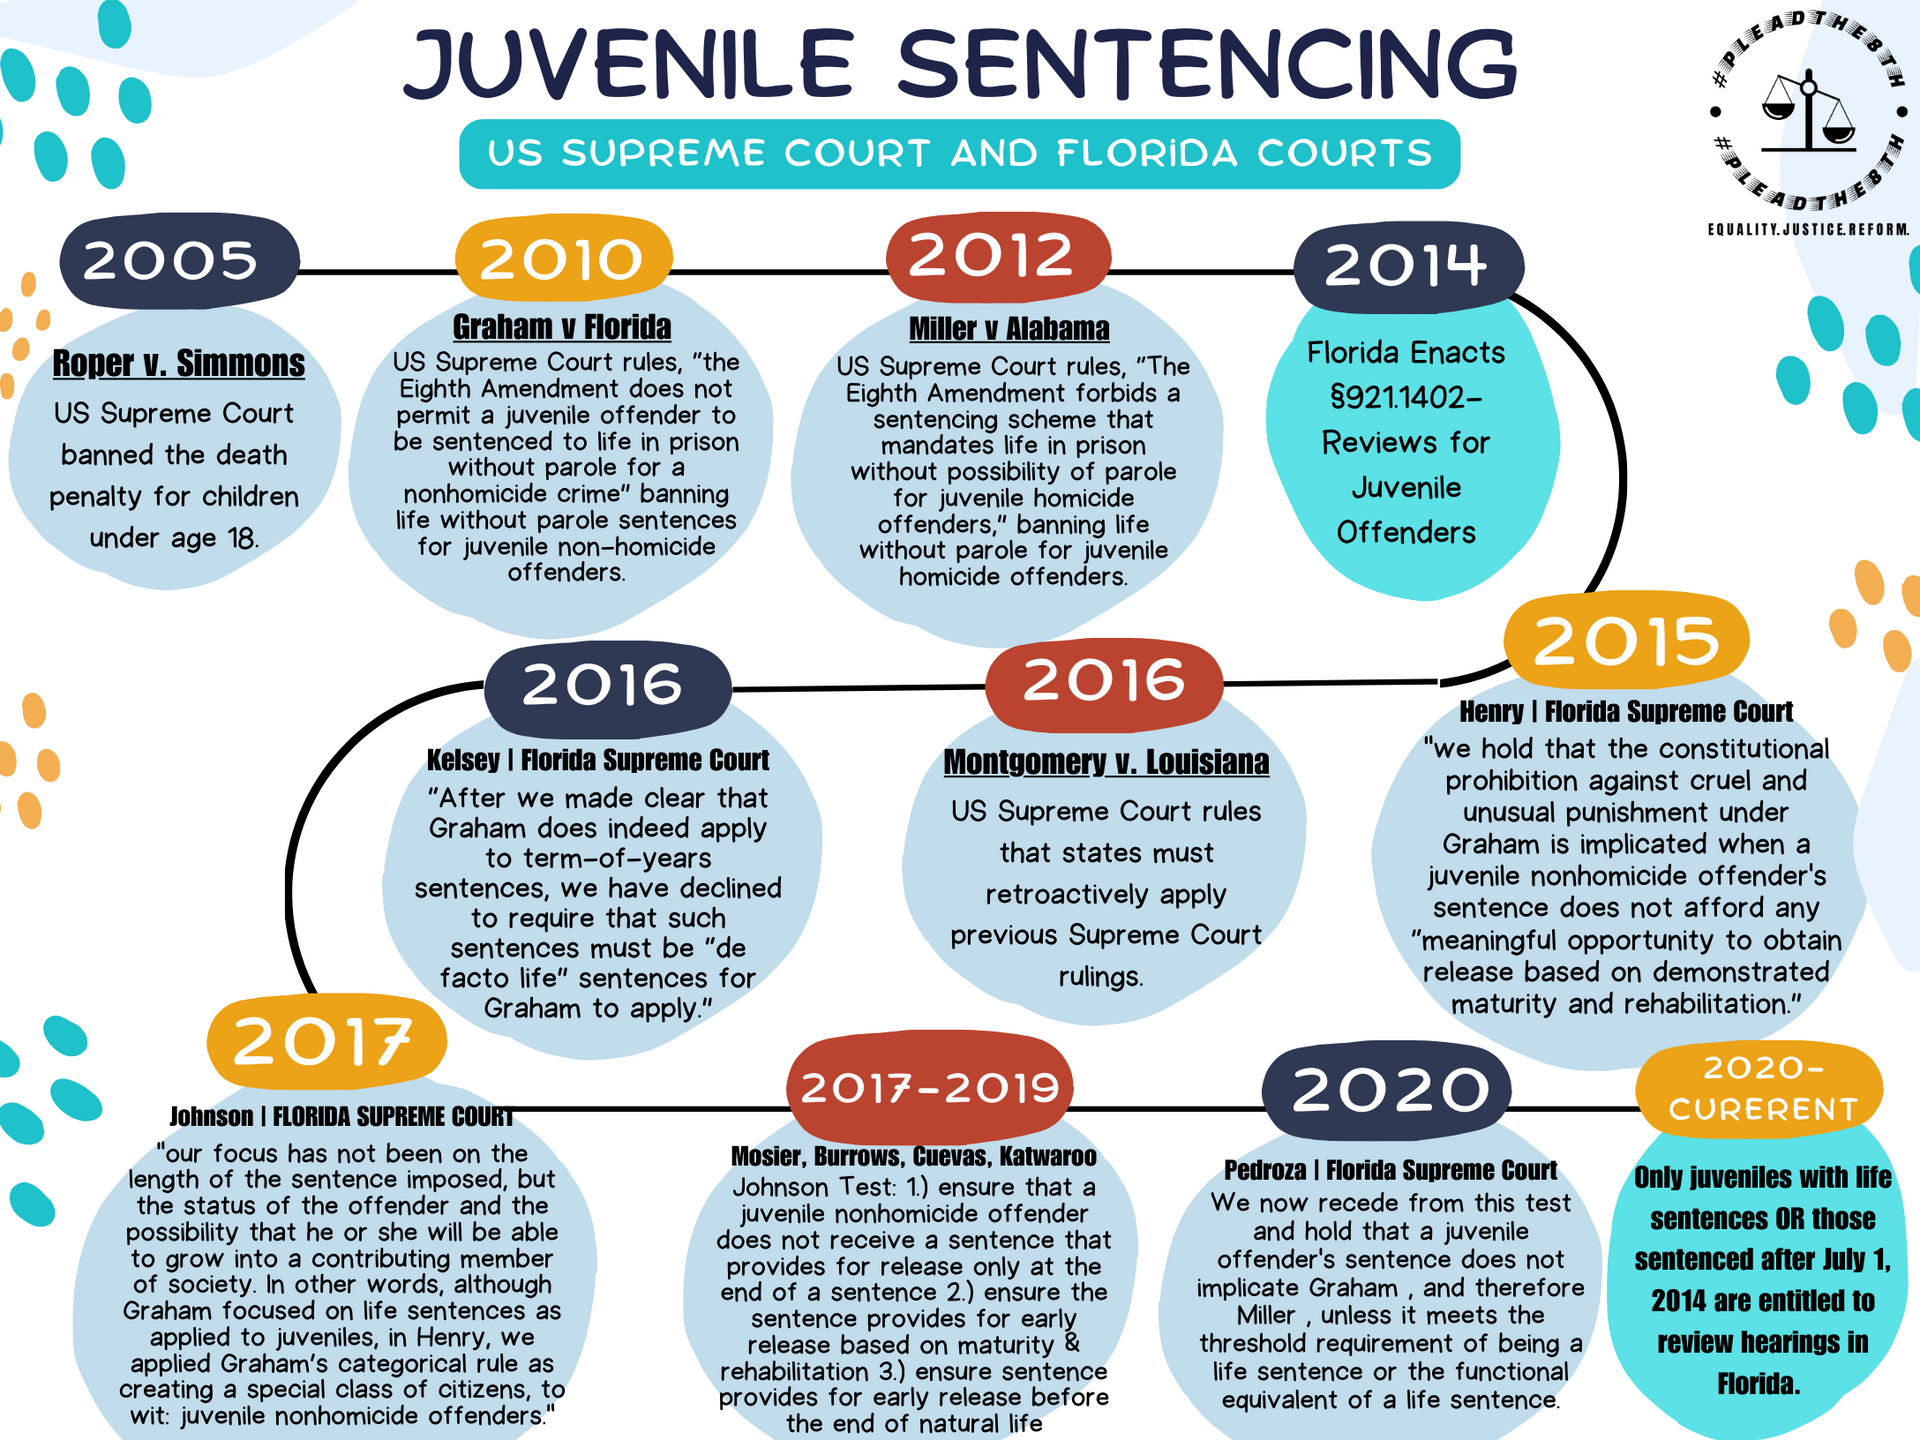 Timelines of Juvenile sentencing; US supreme court and Florida courts.